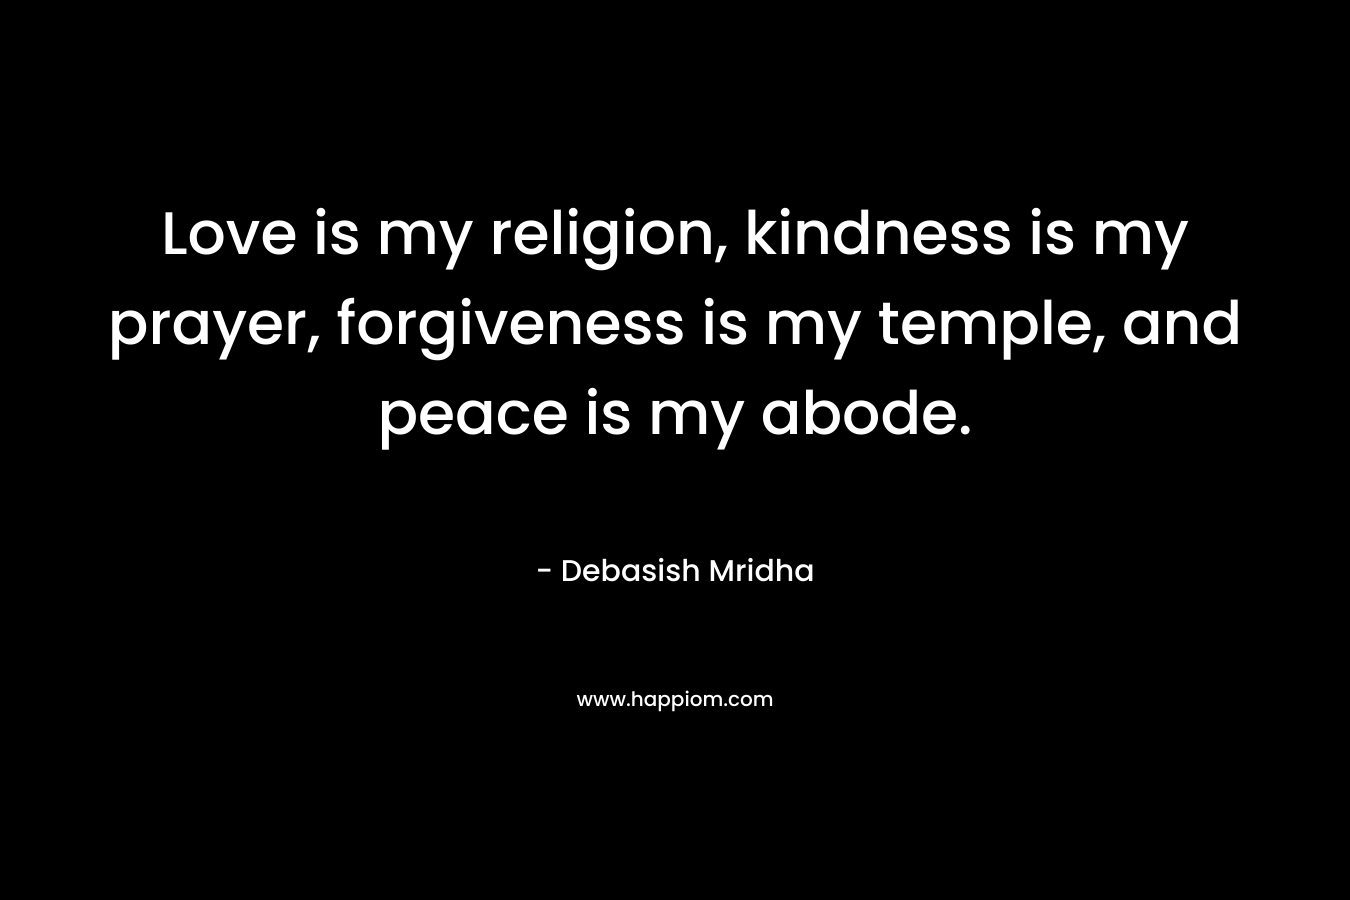 Love is my religion, kindness is my prayer, forgiveness is my temple, and peace is my abode.